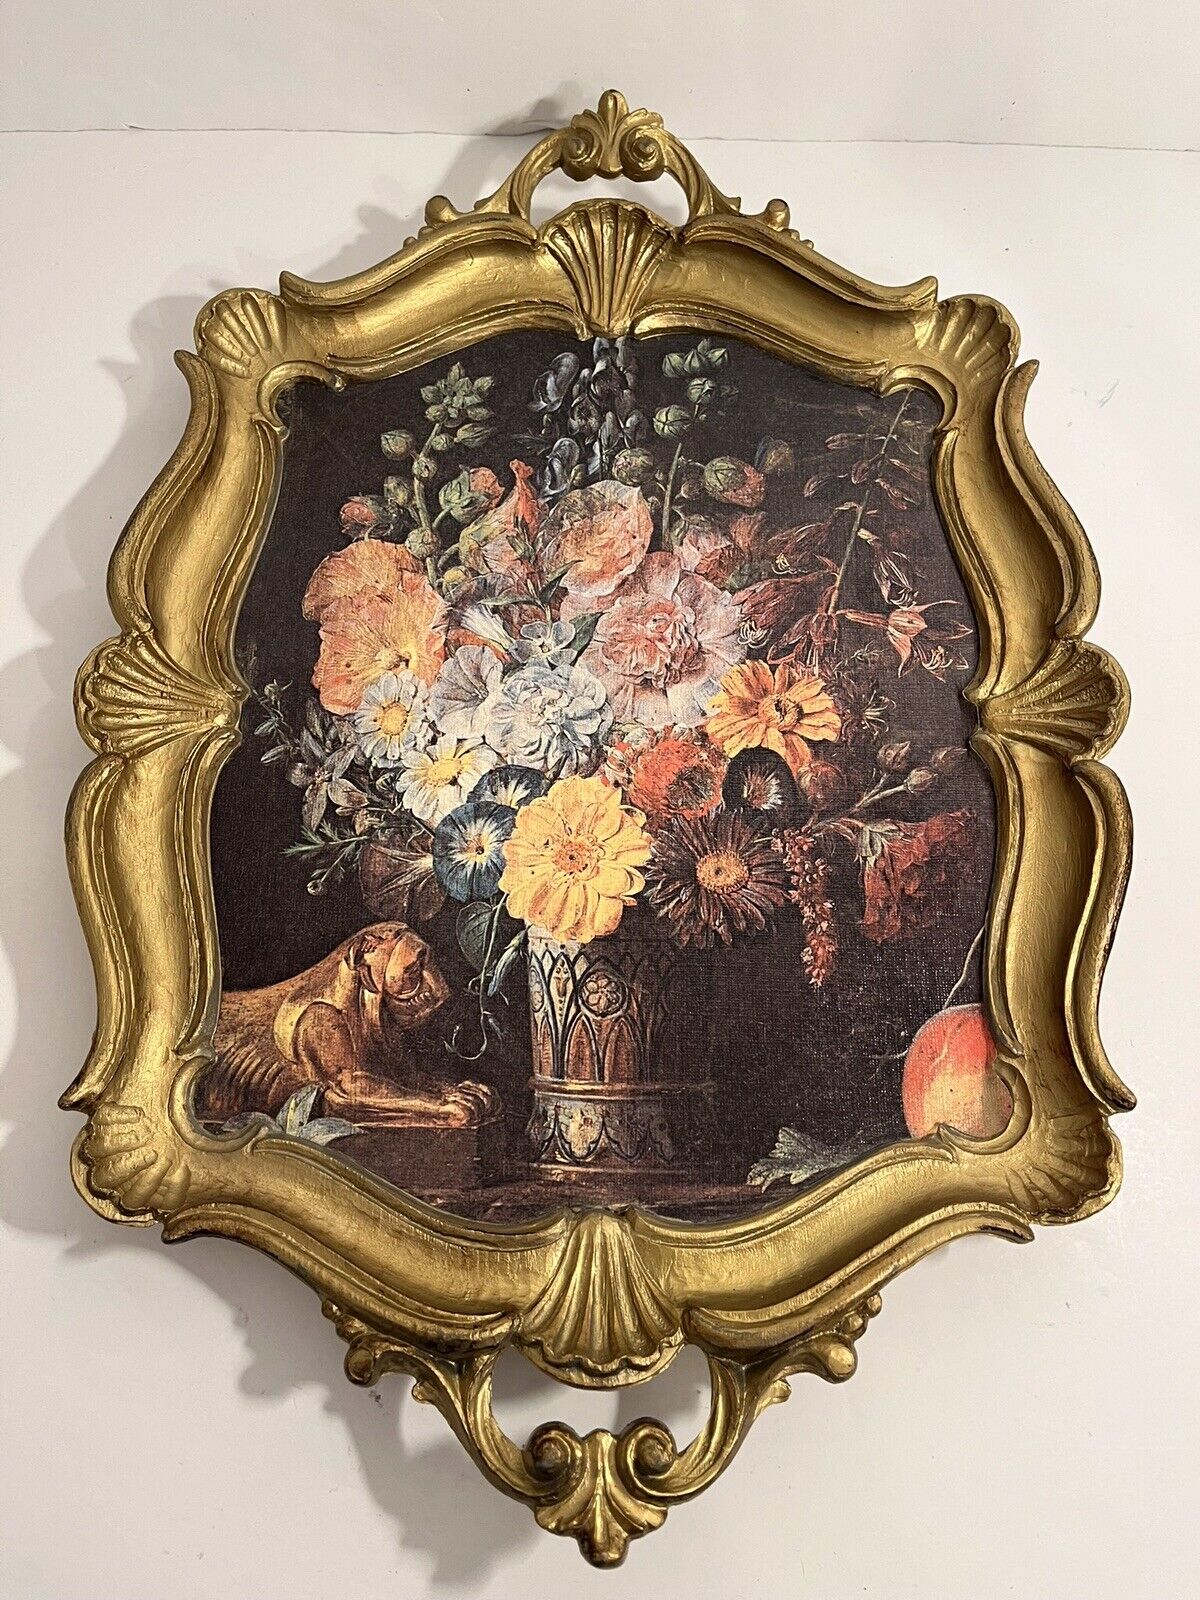 Vintage Italian Gold Tone Tray with Floral Still Life Art in Center 16.5 Inch